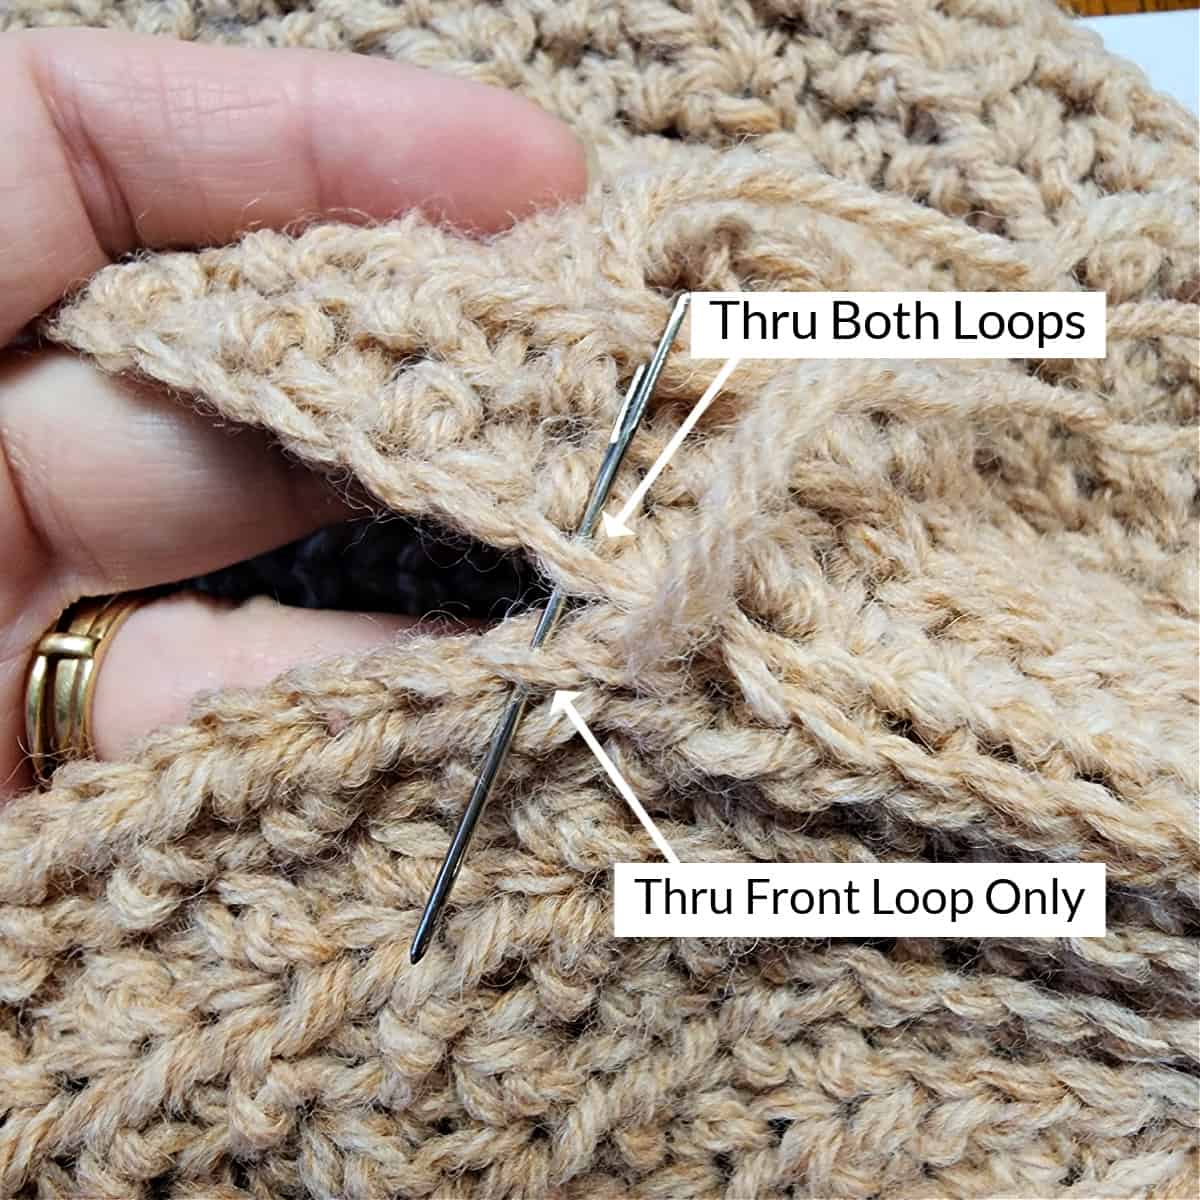 Photo showing how to seam the middle section of the seam along the crochet hat.